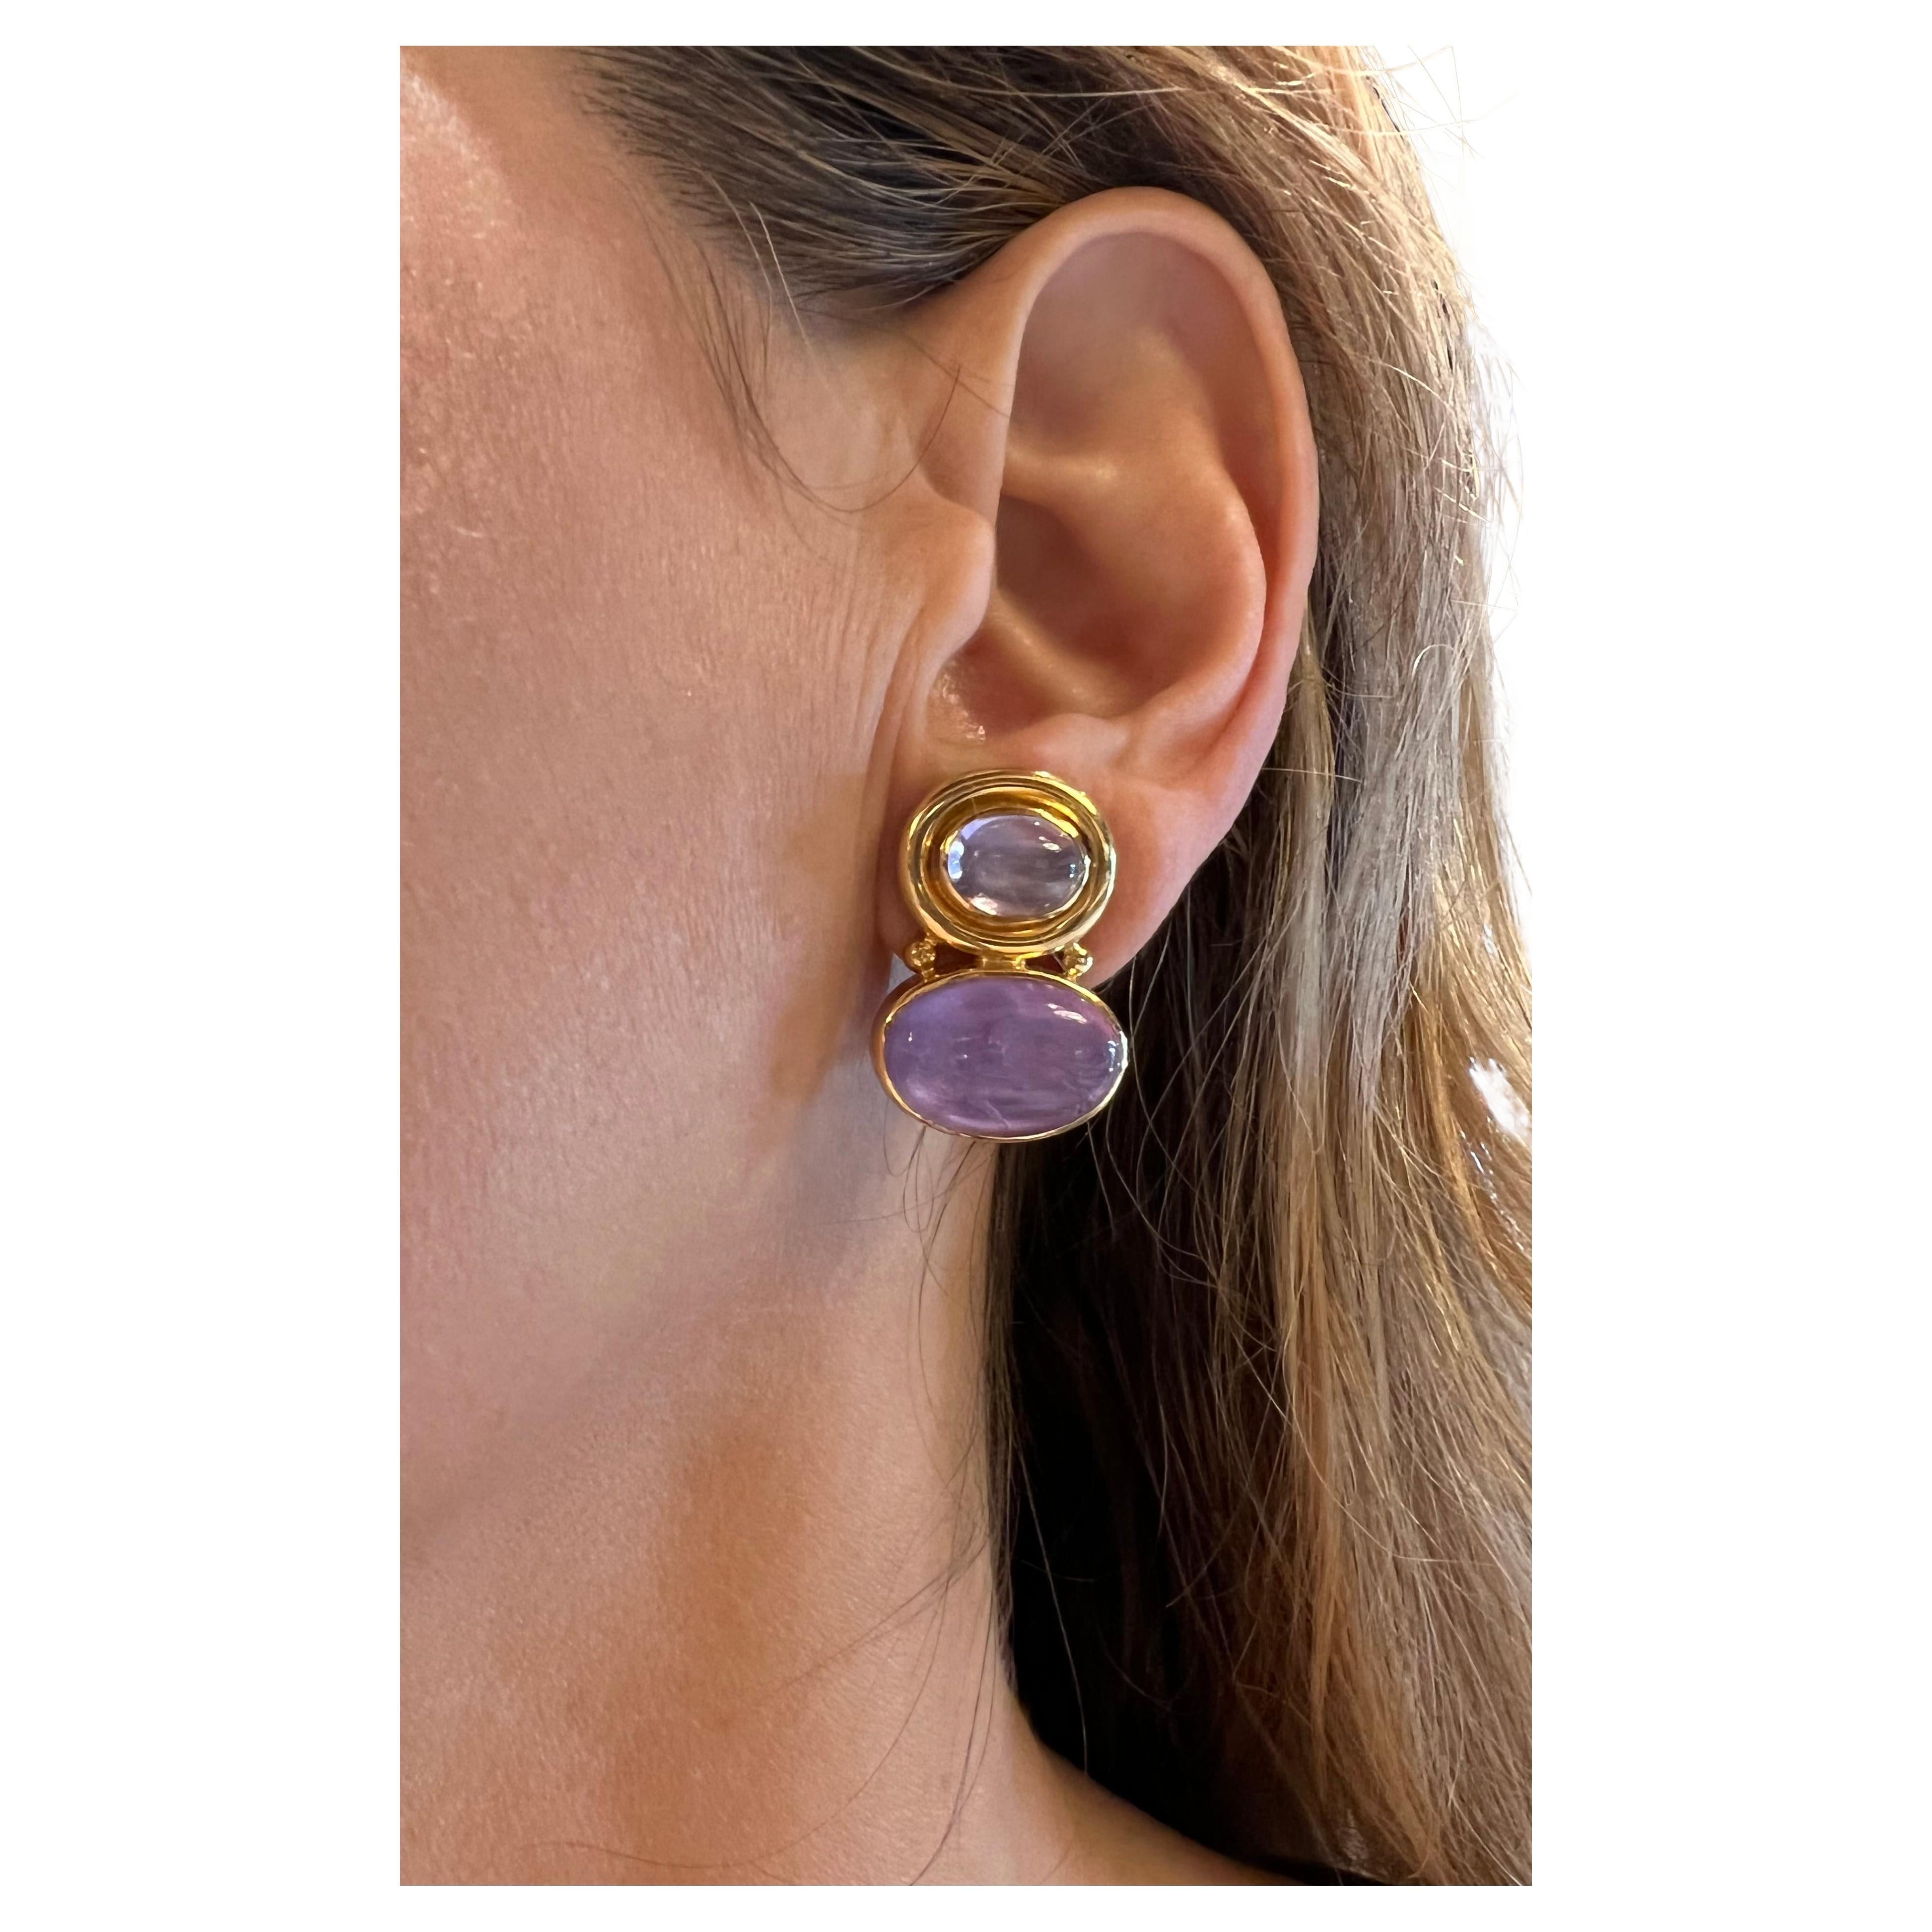 Venetian glass intaglio earrings in 19k yellow gold, the top is set with a polished, light purple Venetian glass cabochon and the bottoms are set with purple oval, carved intaglios, with mother-of-pearl on the reverse side. Pierced, fold down hinged